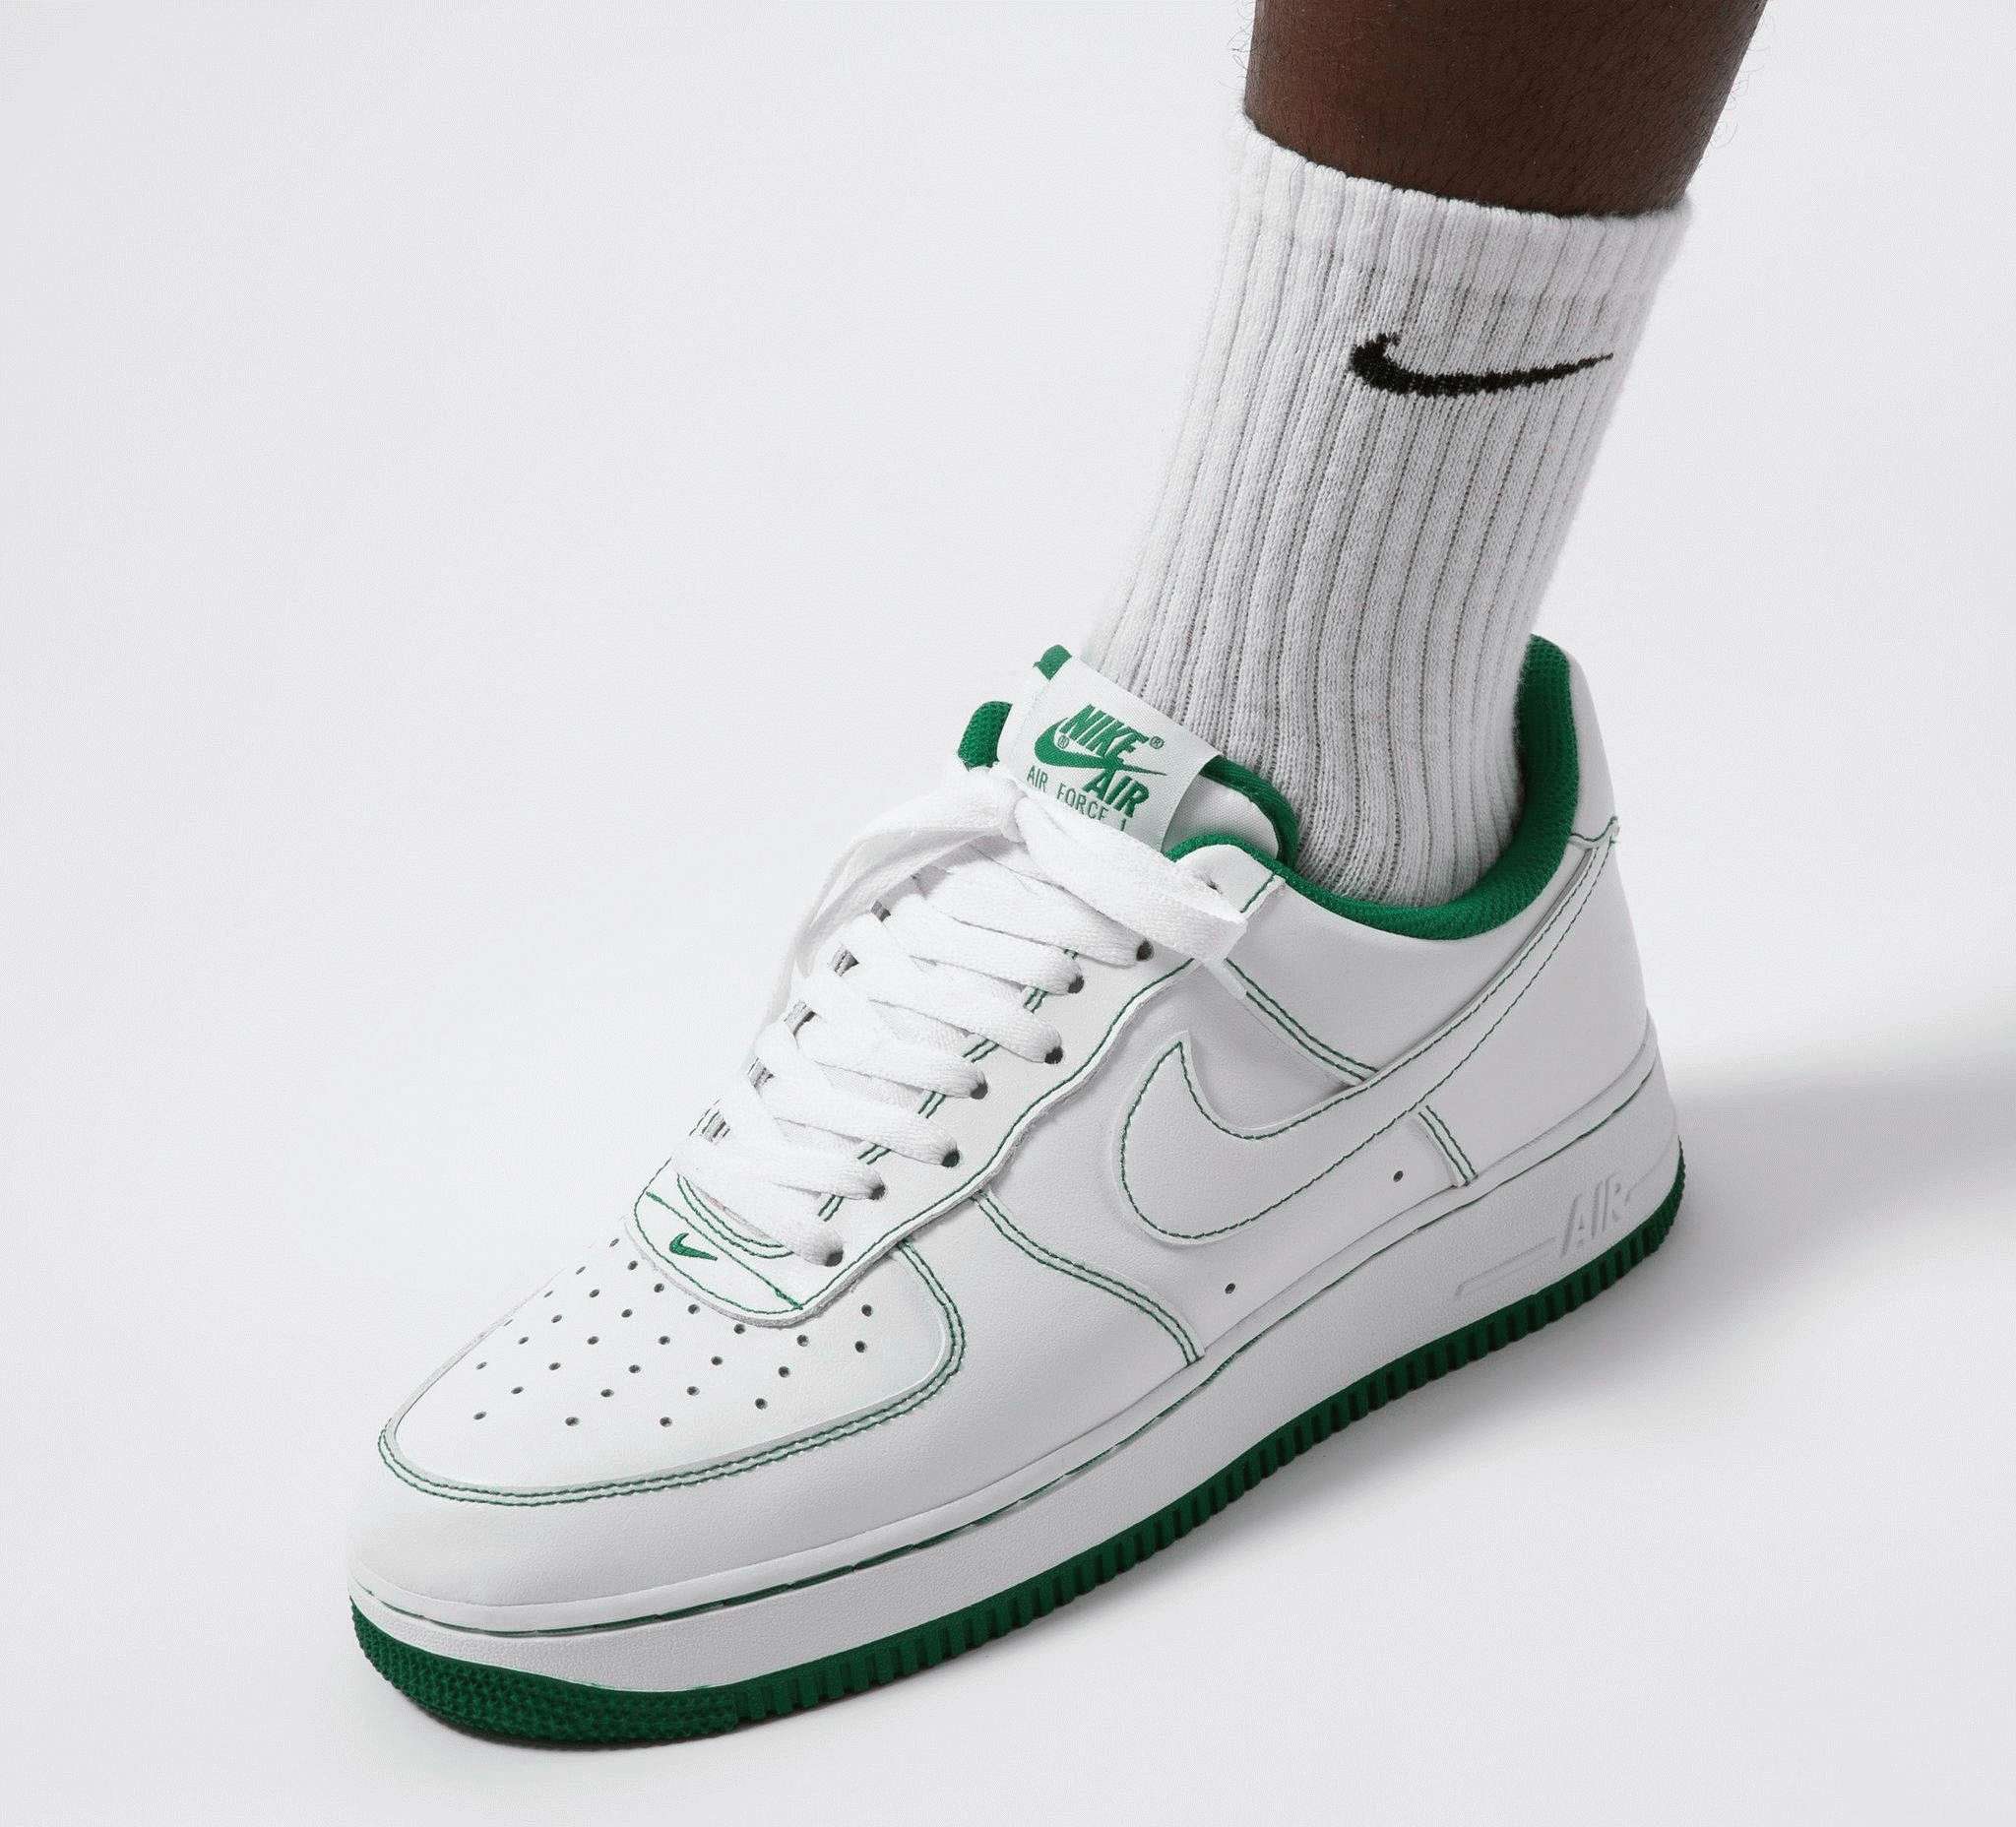 NK Air Force One Low White Pine Green on feet